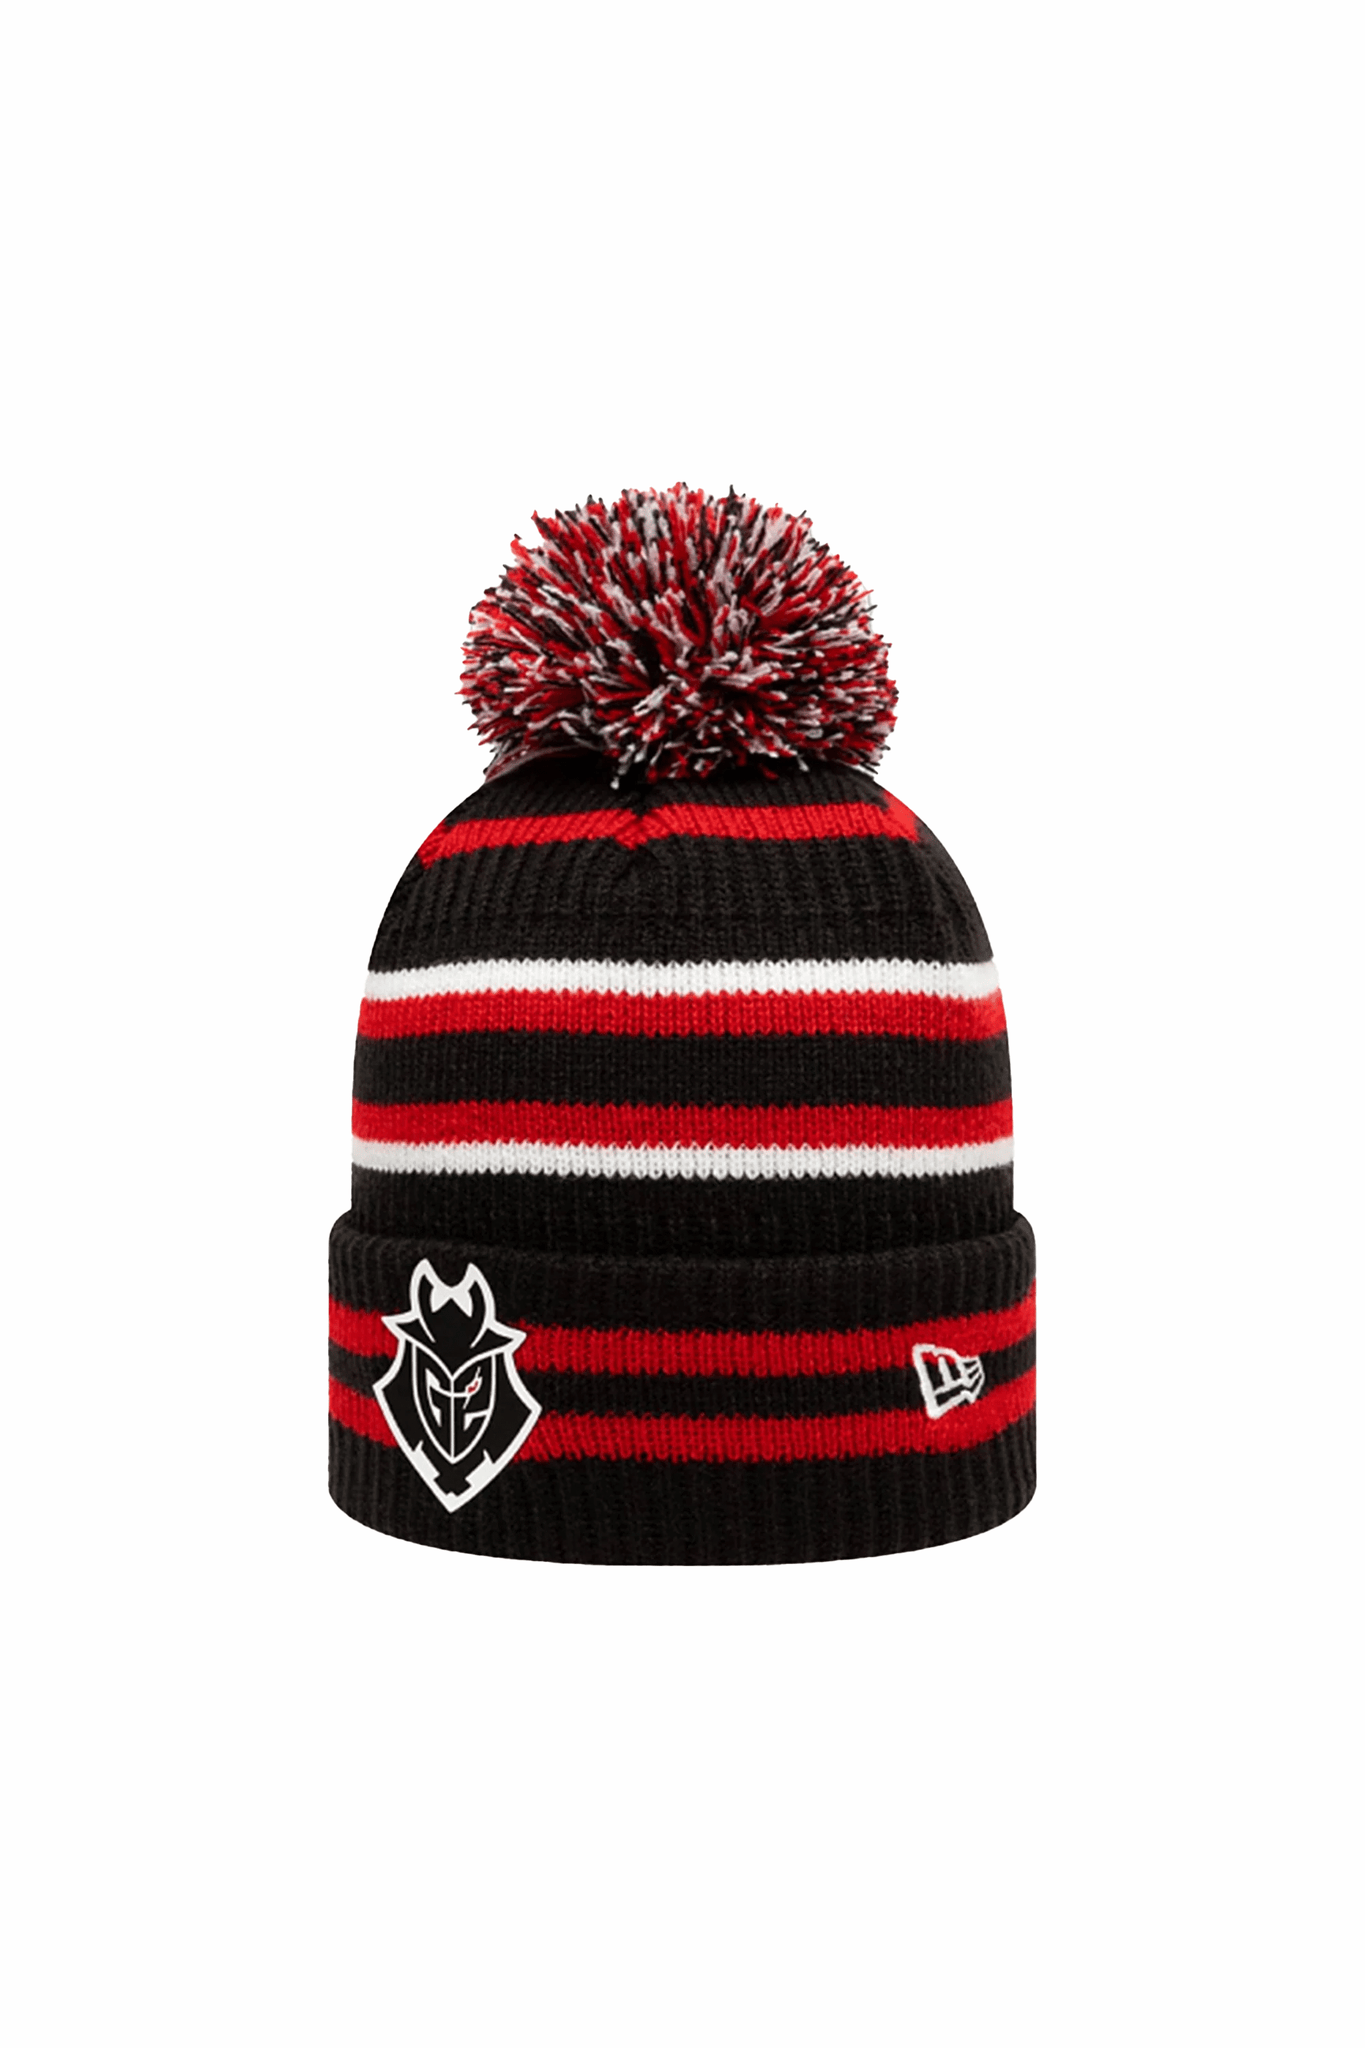 G2 x New Era bobble cuff beanie, a must-have winter accessory. Stay warm and stylish while supporting G2 Esports in this collaborative piece